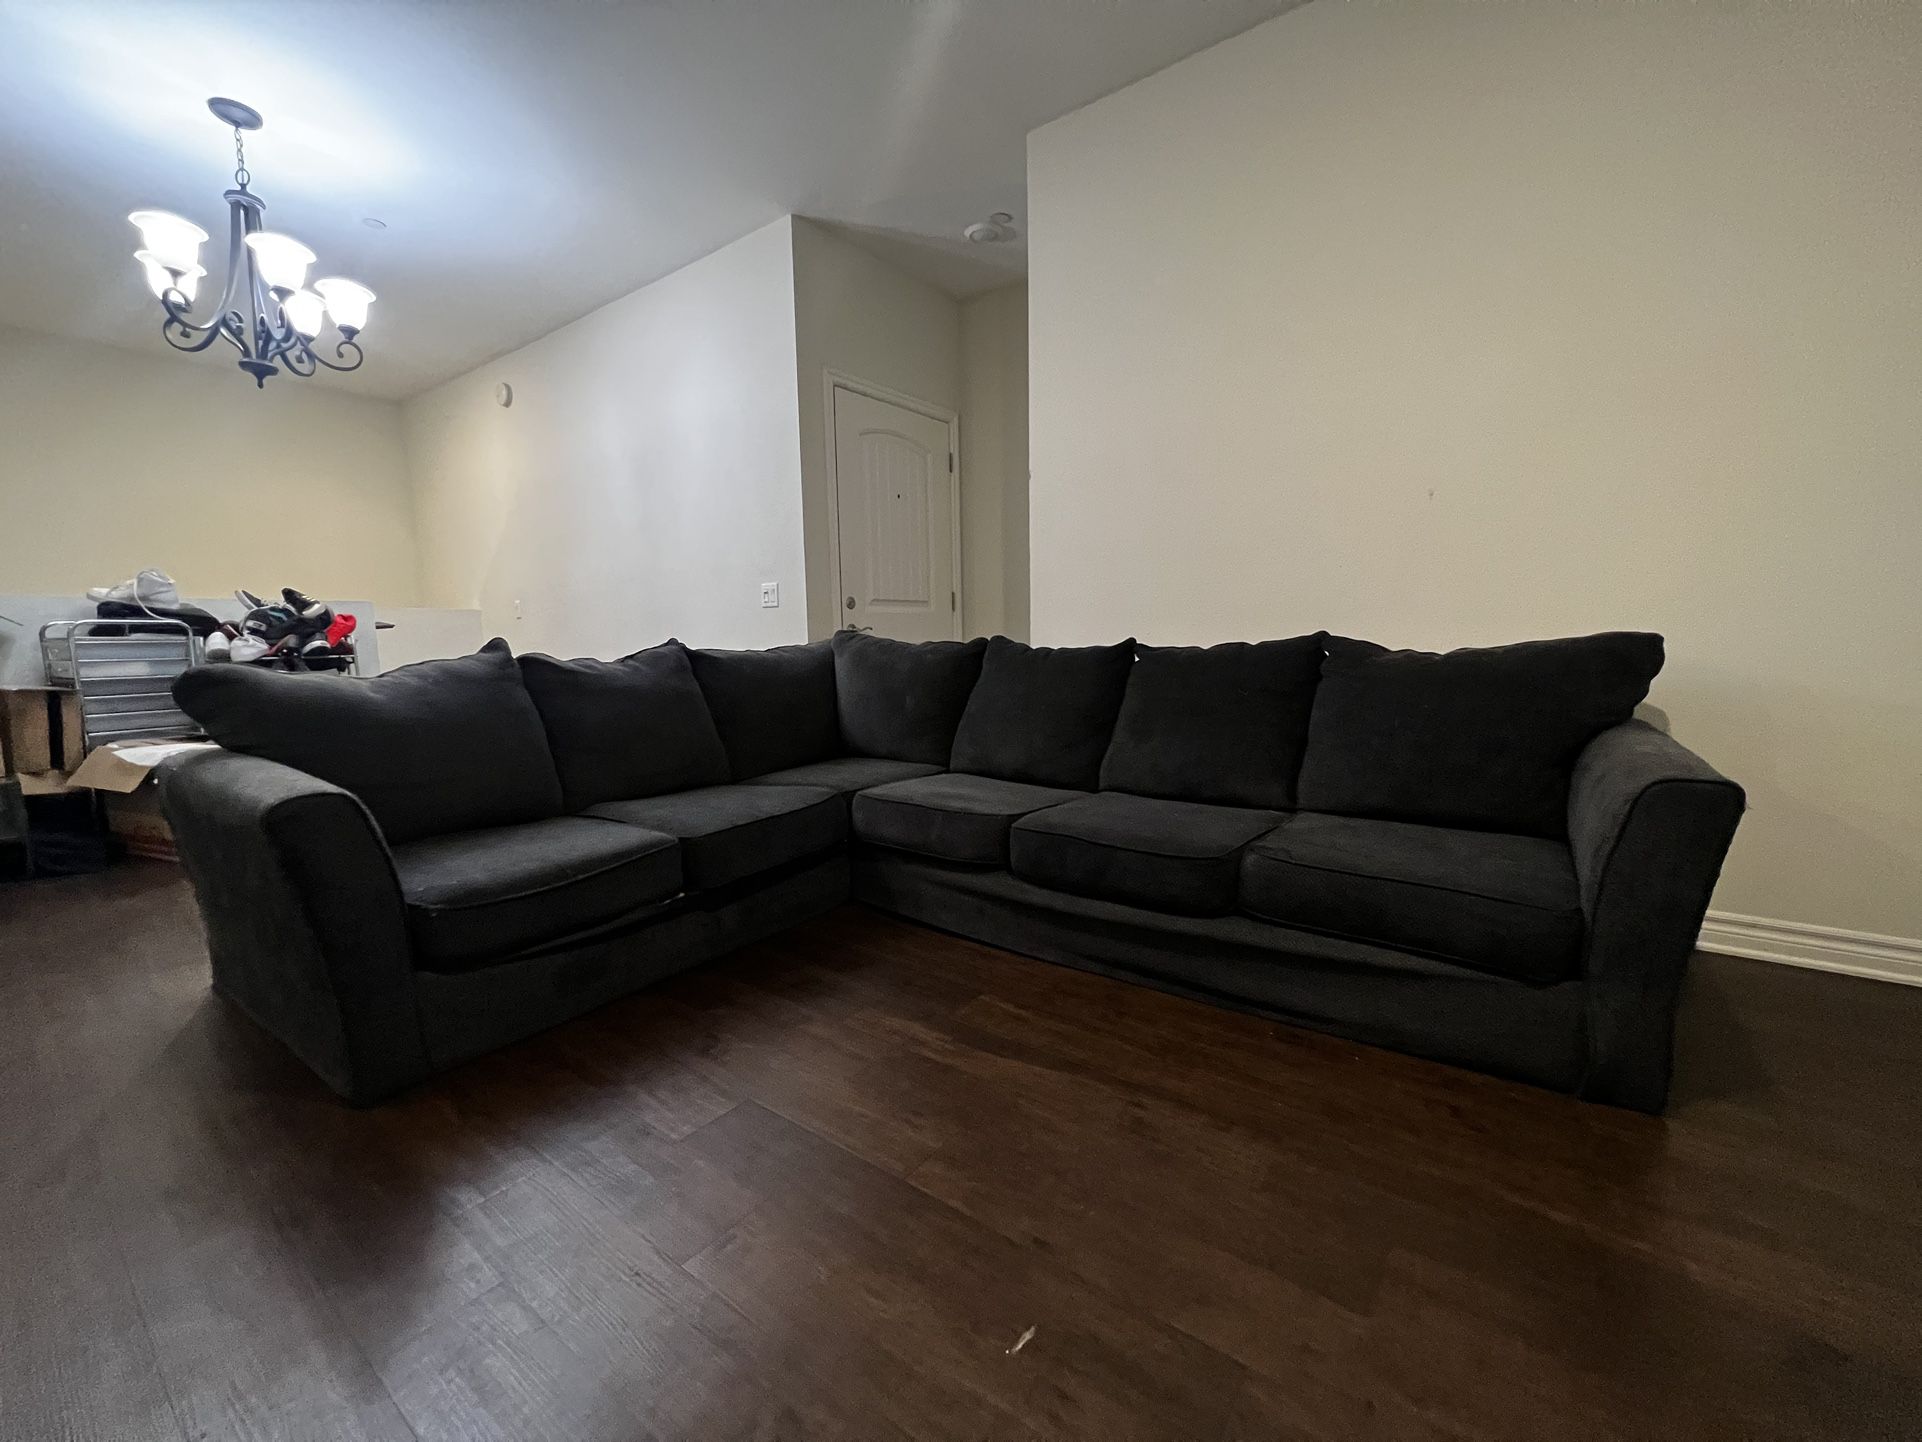 FREE L-SHAPE COUCHES